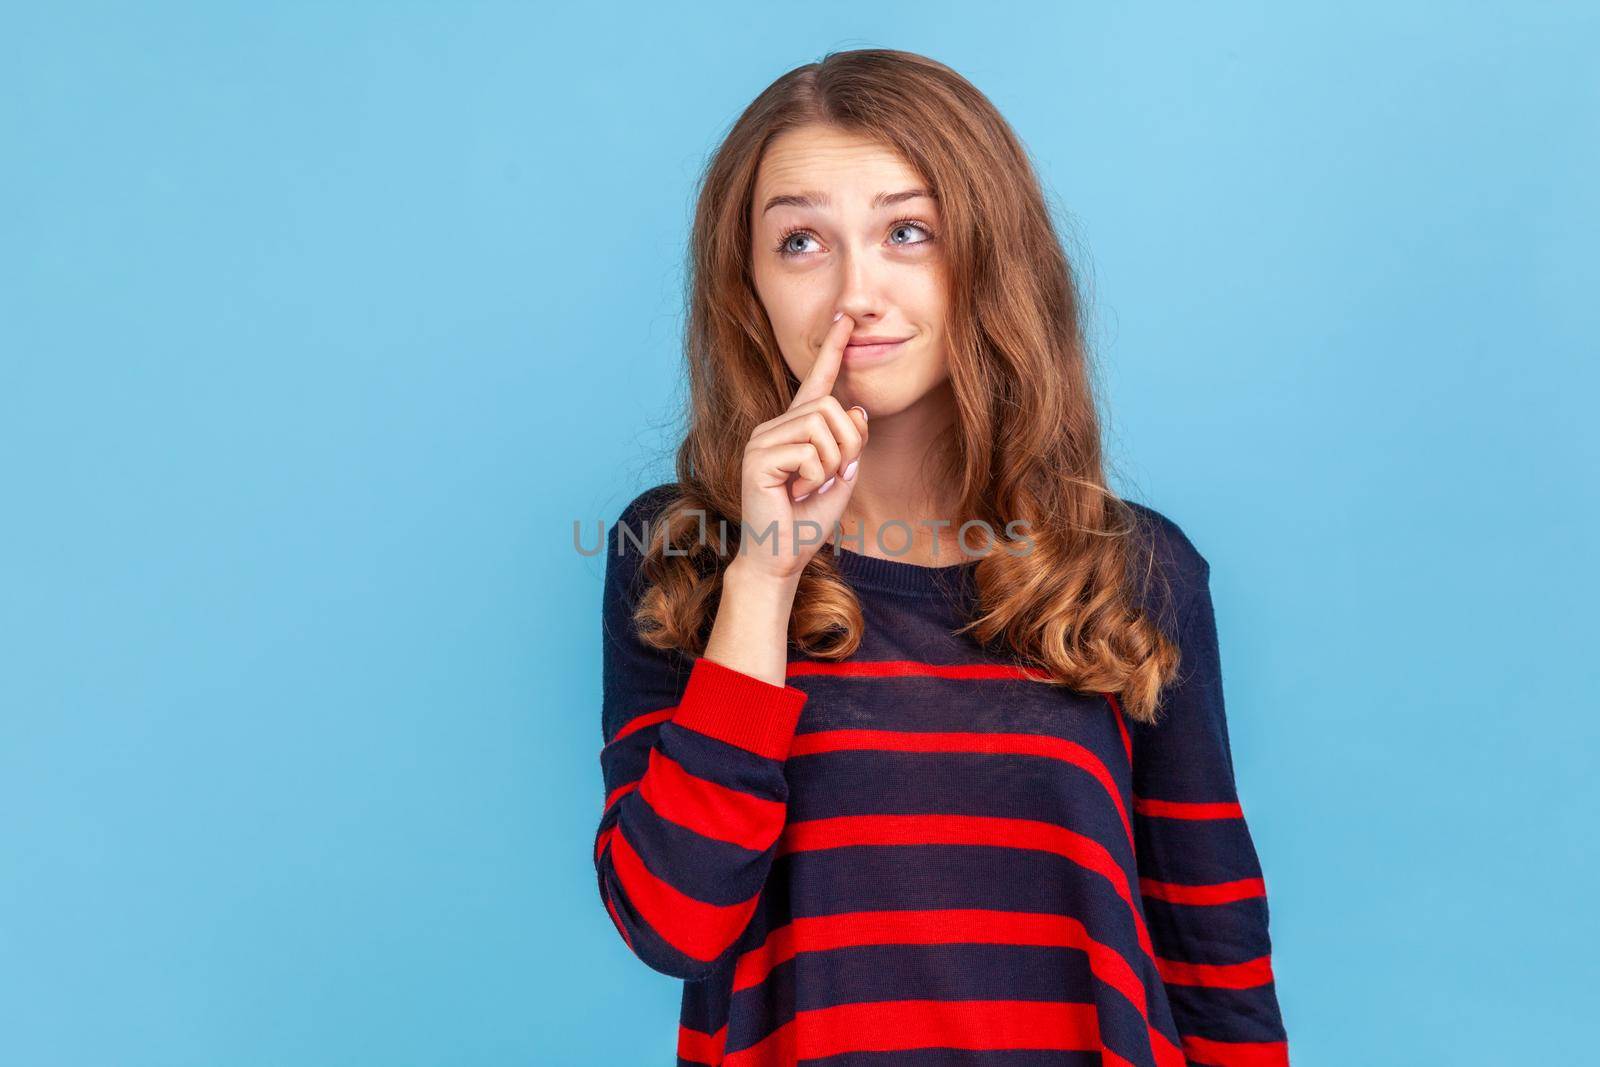 Childish woman wearing striped casual style sweater holding finger in her nose, uncultured bored girl having fun, bad manners, looking away. Indoor studio shot isolated on blue background.